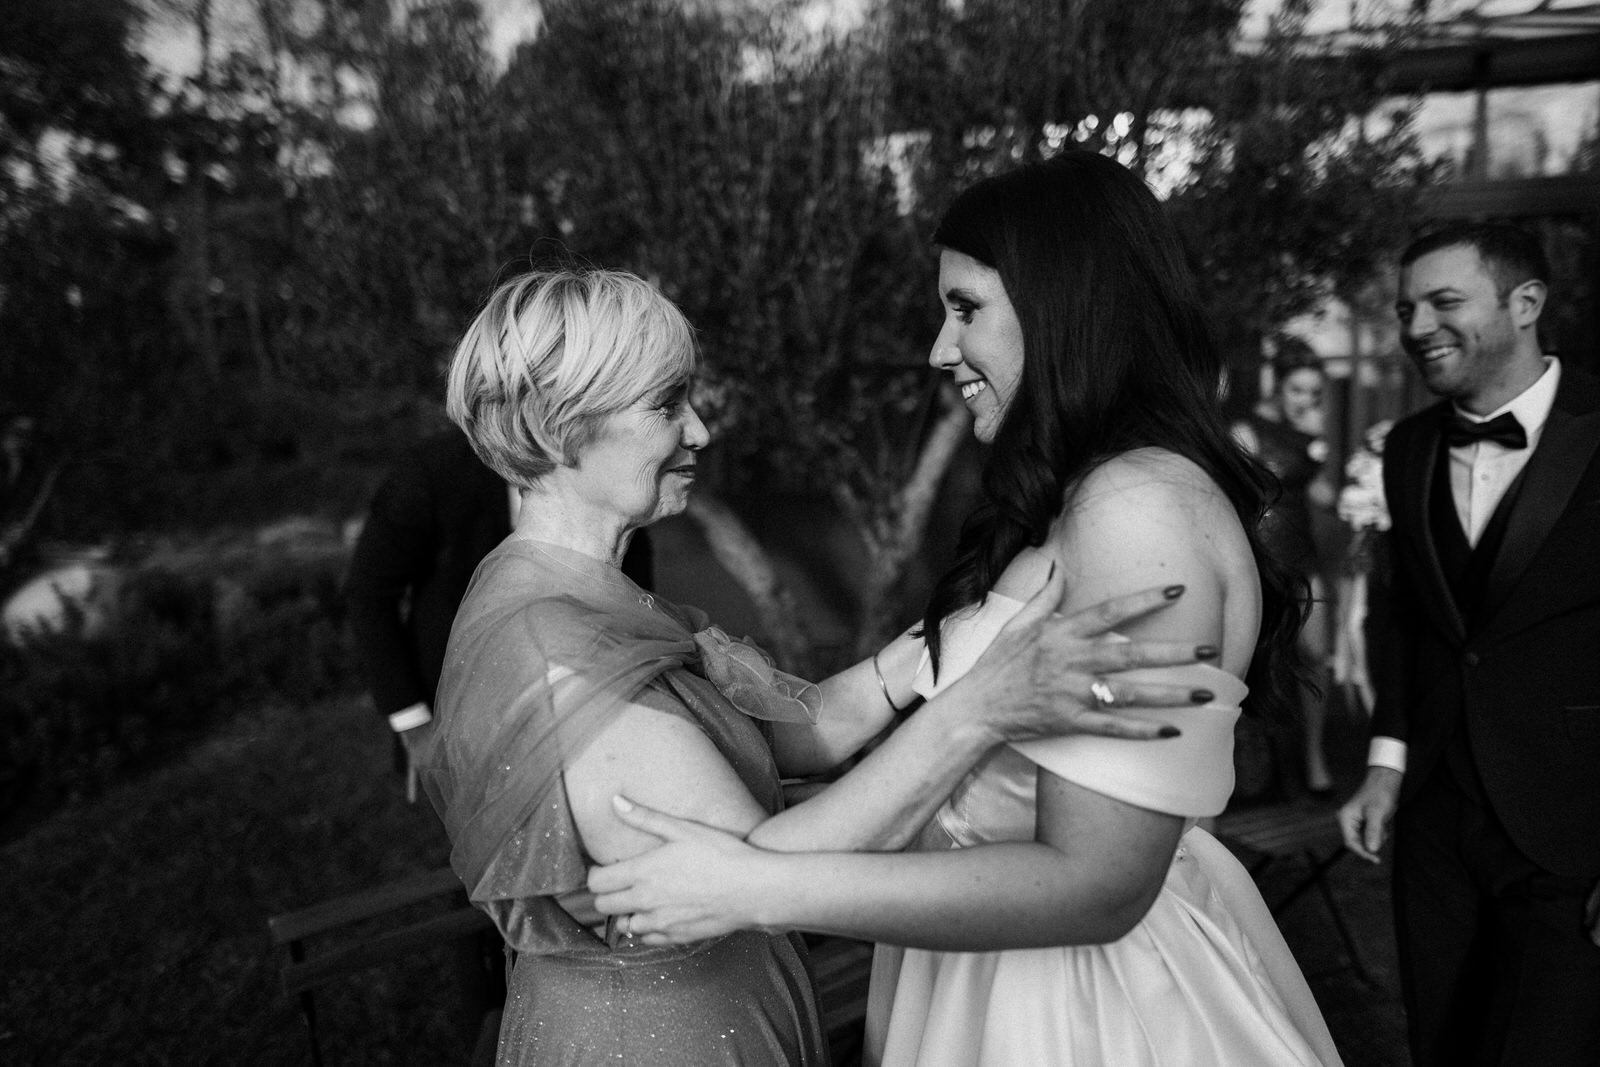 mother daughter moment at an intimate wedding ceremony in Croatia